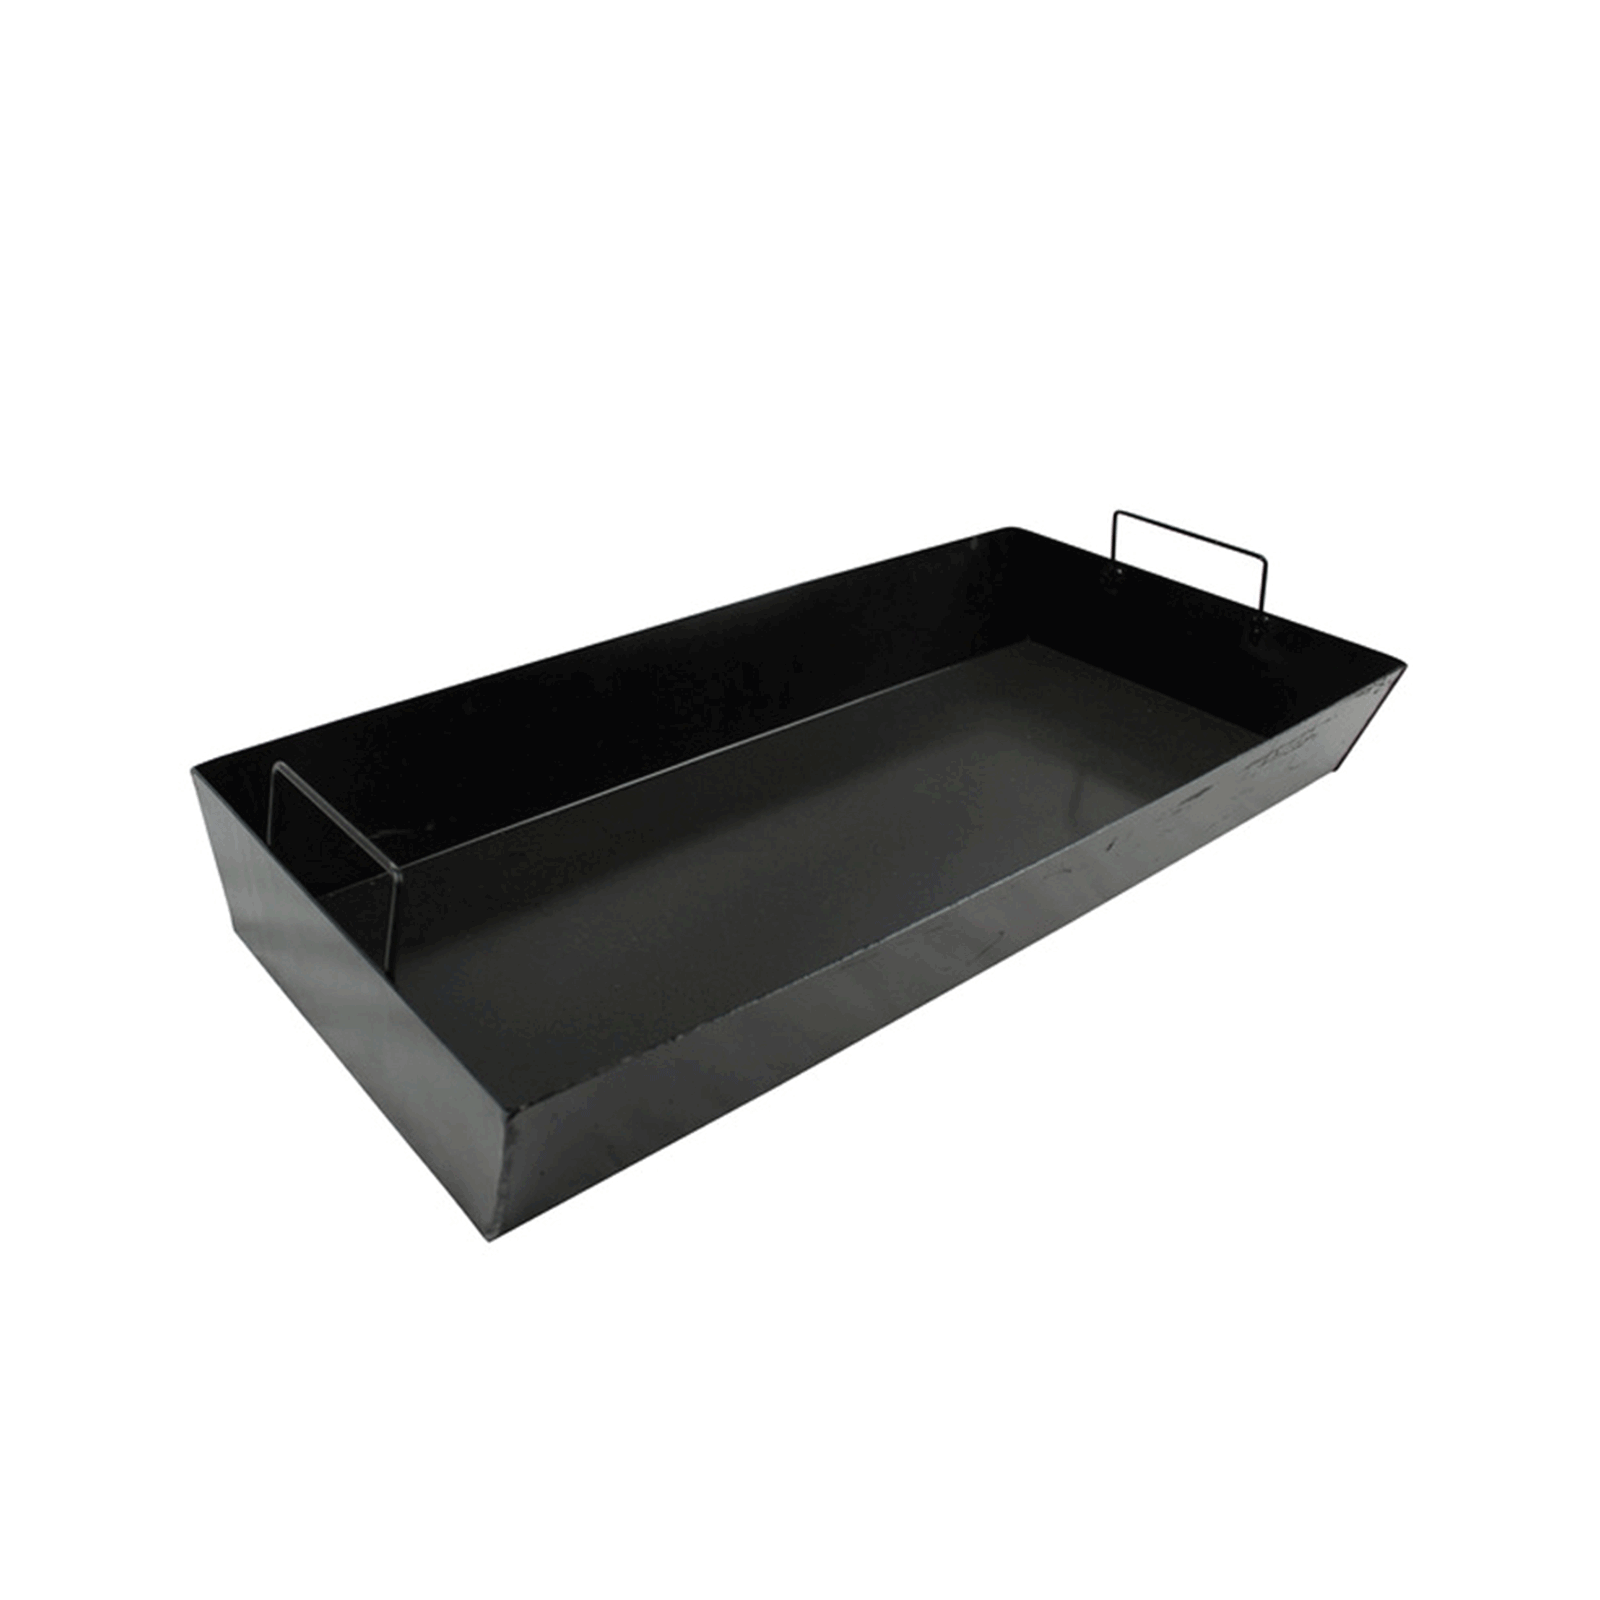 Cyprus Grill Charcoal Tray to suit Modern Cyprus Grill Limited Edition (Black) - CGCT-002